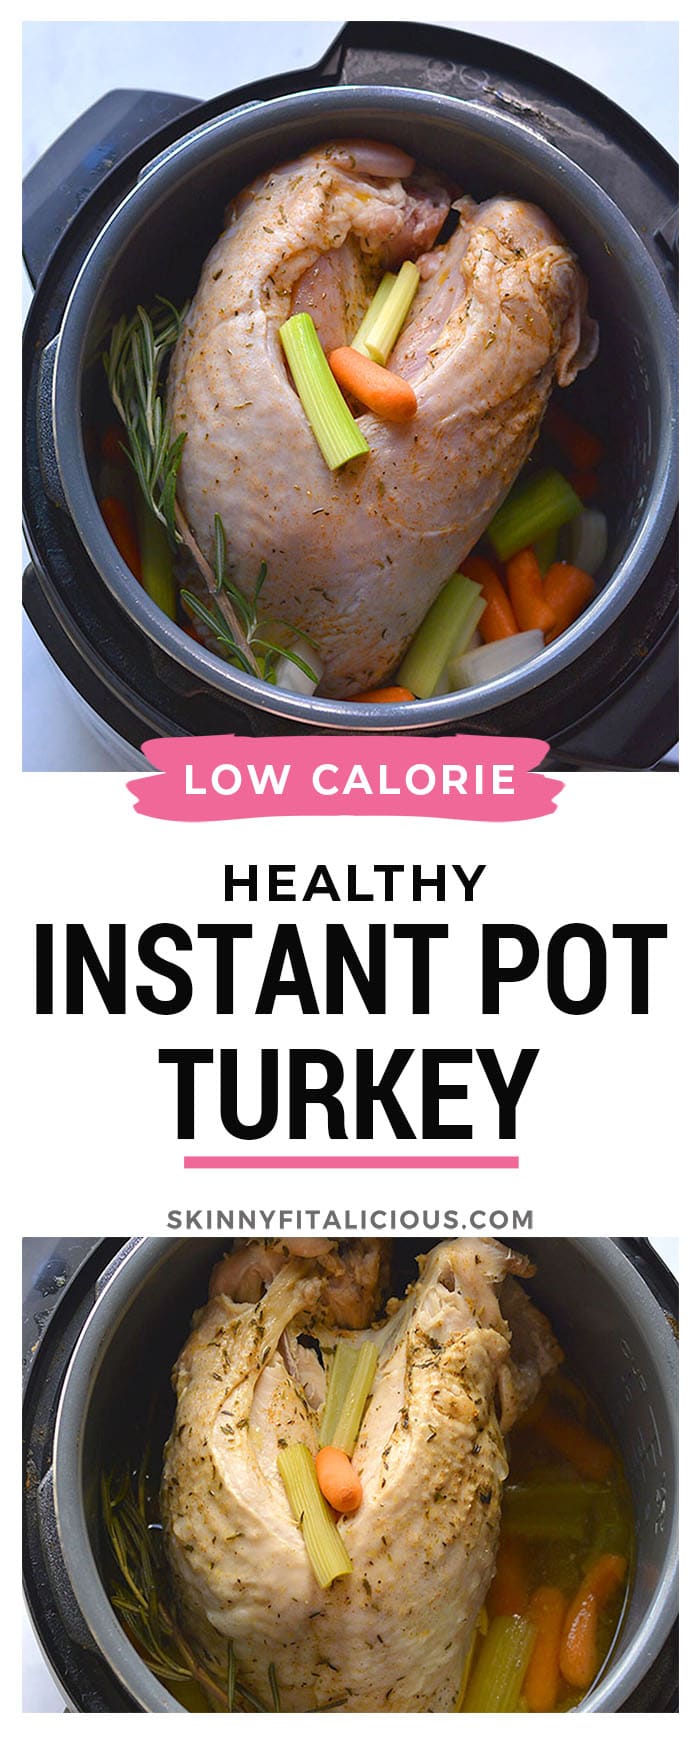 Instant Pot Turkey Breast! Yes you CAN make a delicious turkey breast in your instant pot in under 35 minutes. No more spending hours baking a turkey in an oven. This method is easy and makes the turkey super moist and tender.